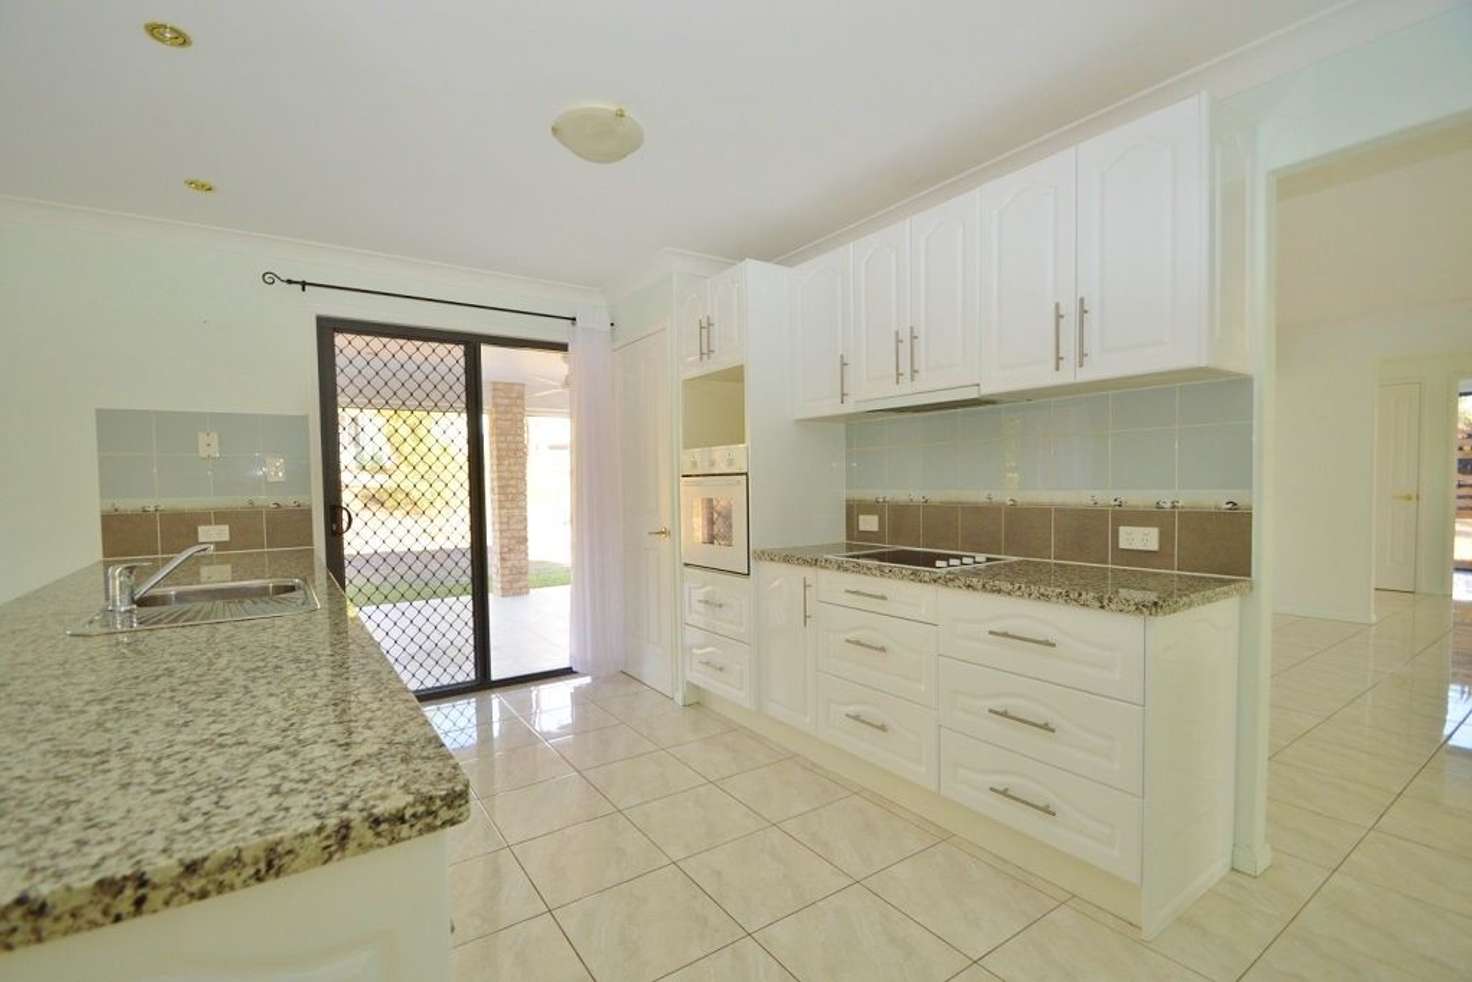 Main view of Homely house listing, 66 Staatz Quarry Road, Regency Downs QLD 4341